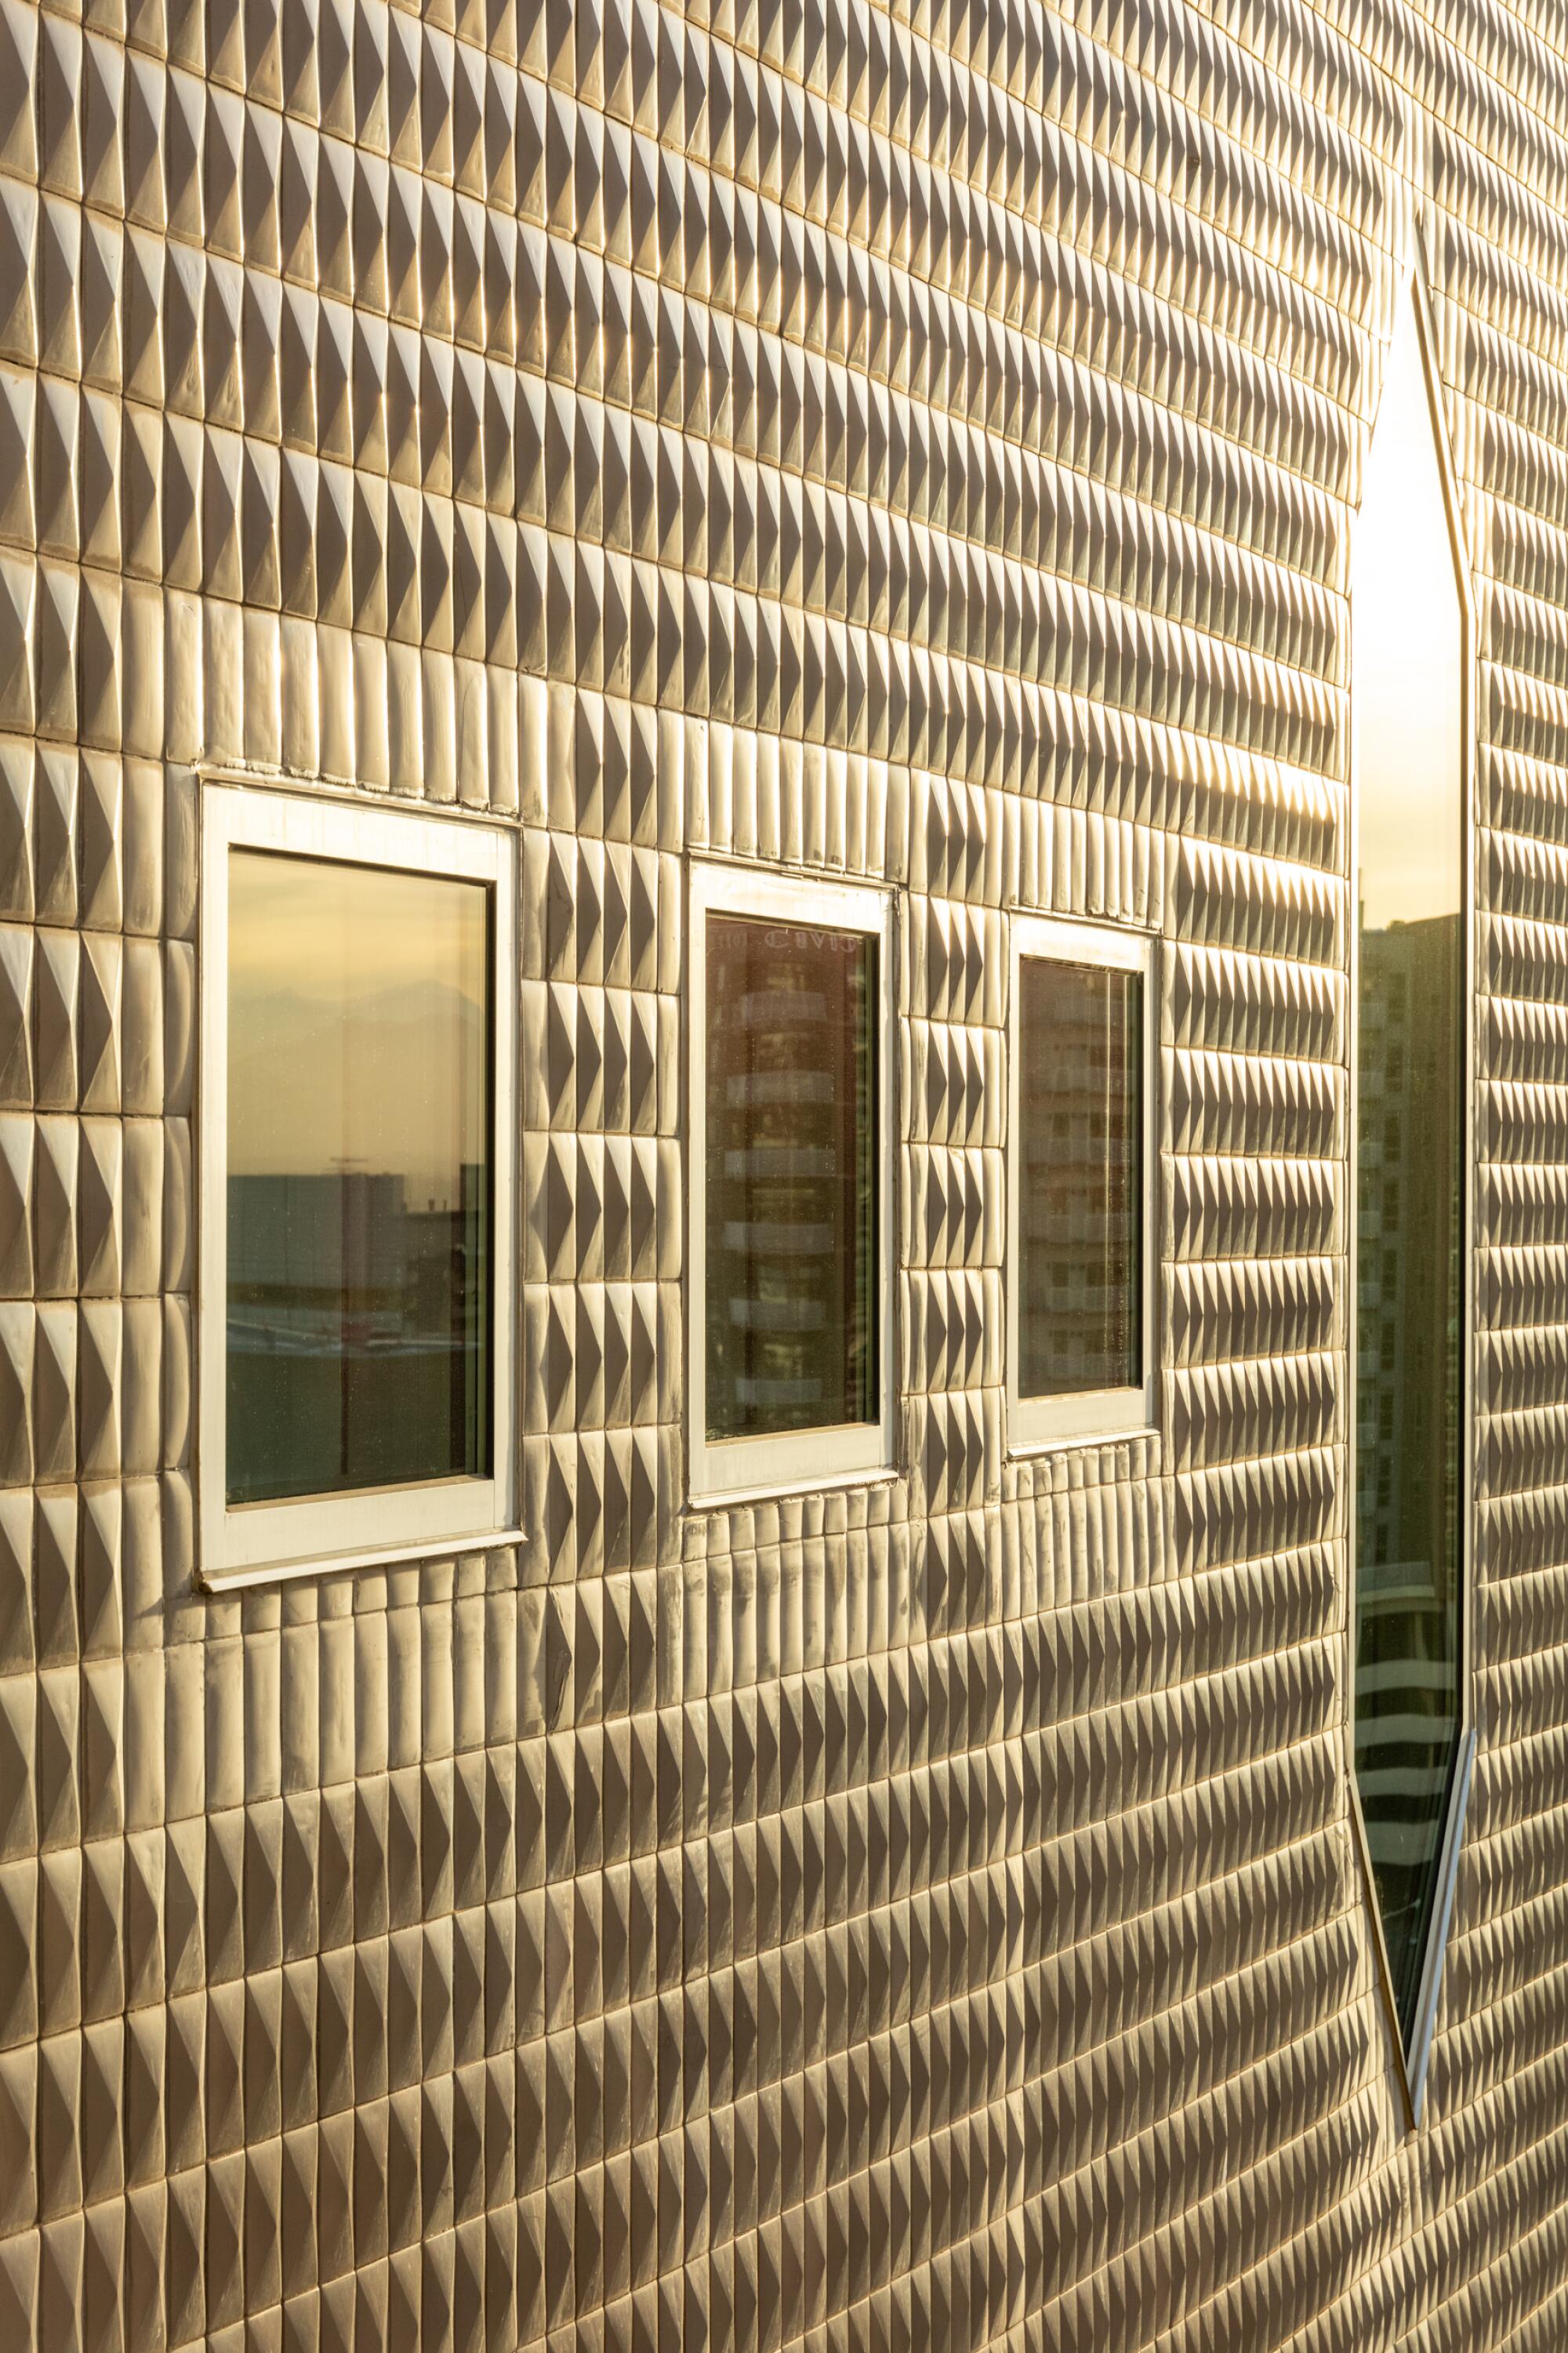 Sunlight reflects on the ceramic tiled facade of the Denver Art Museum by Gio Ponti, making it look golden.